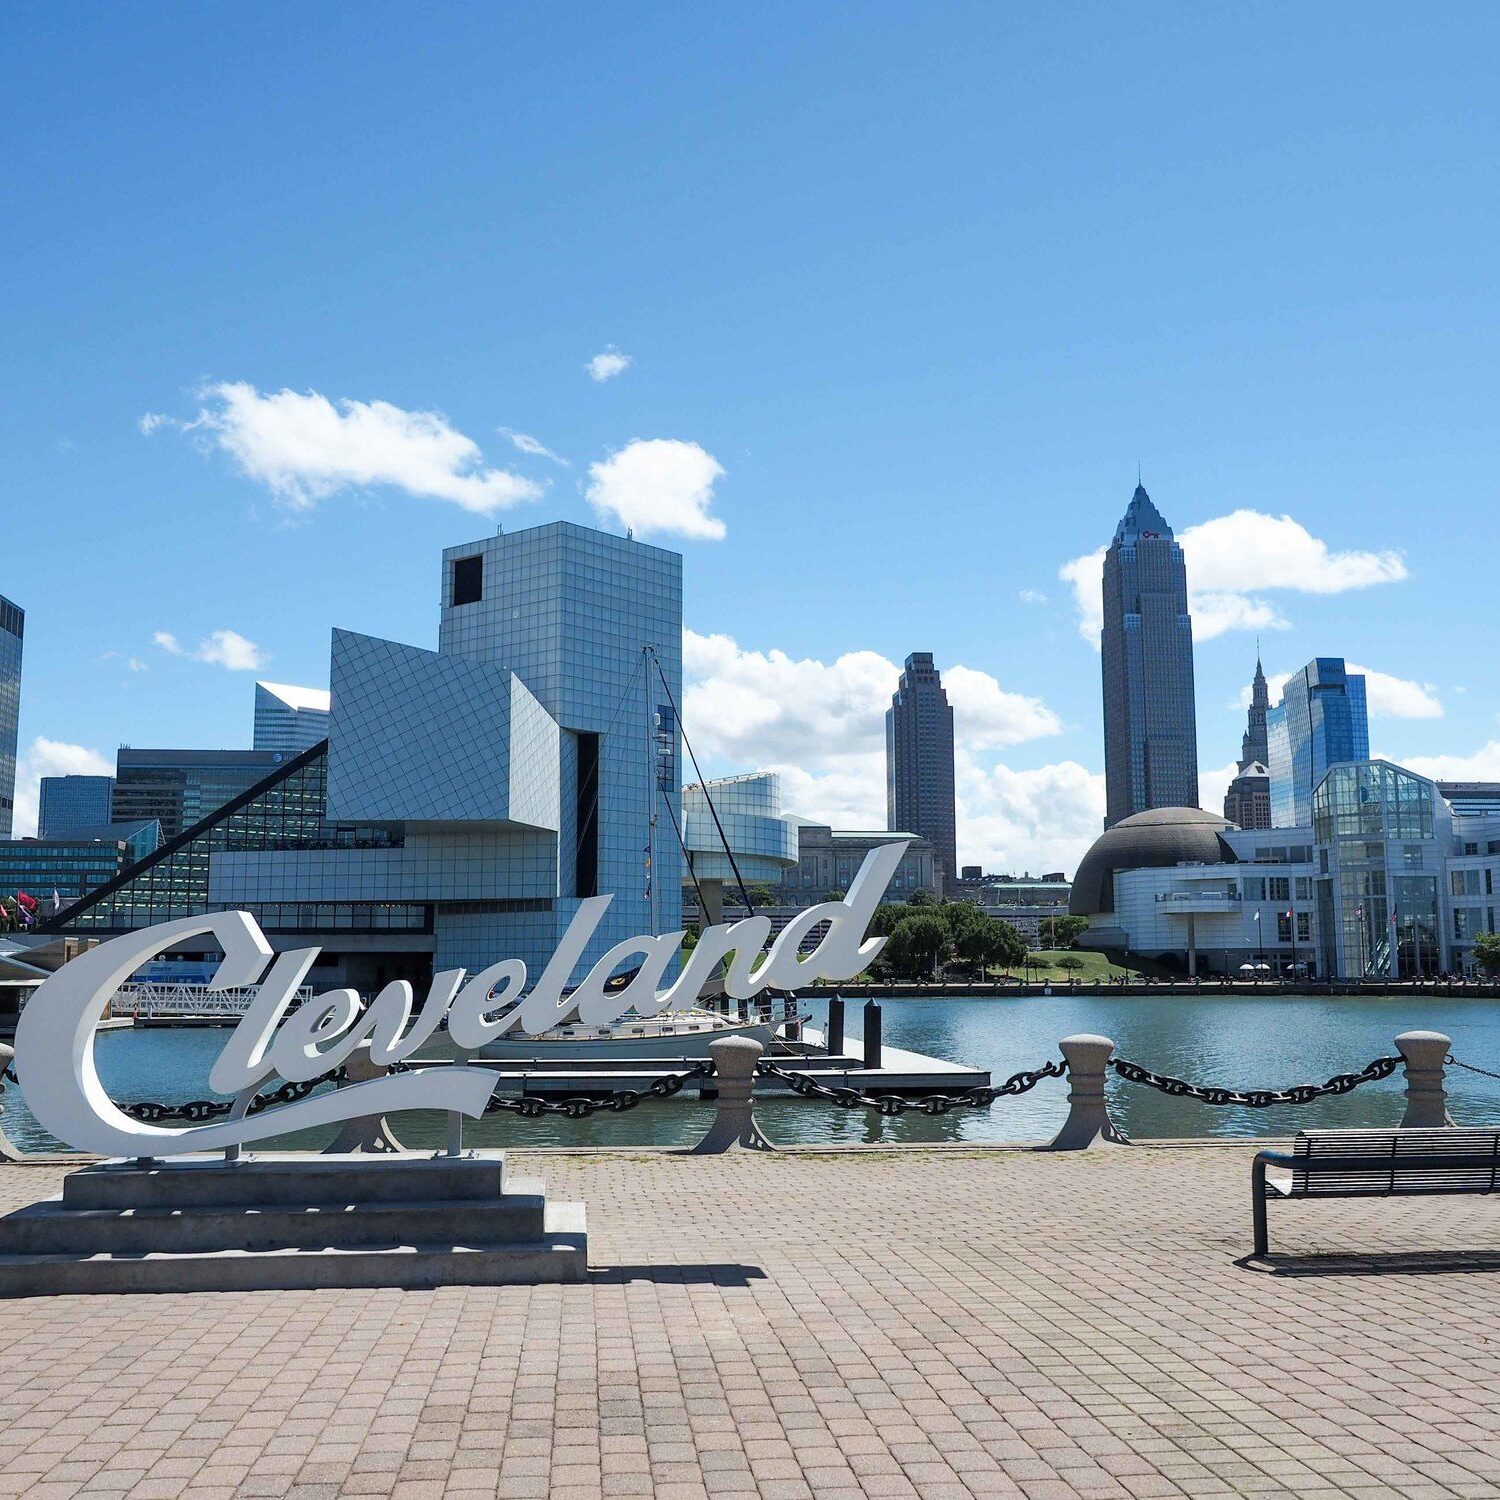 Fun things to do in Cleveland